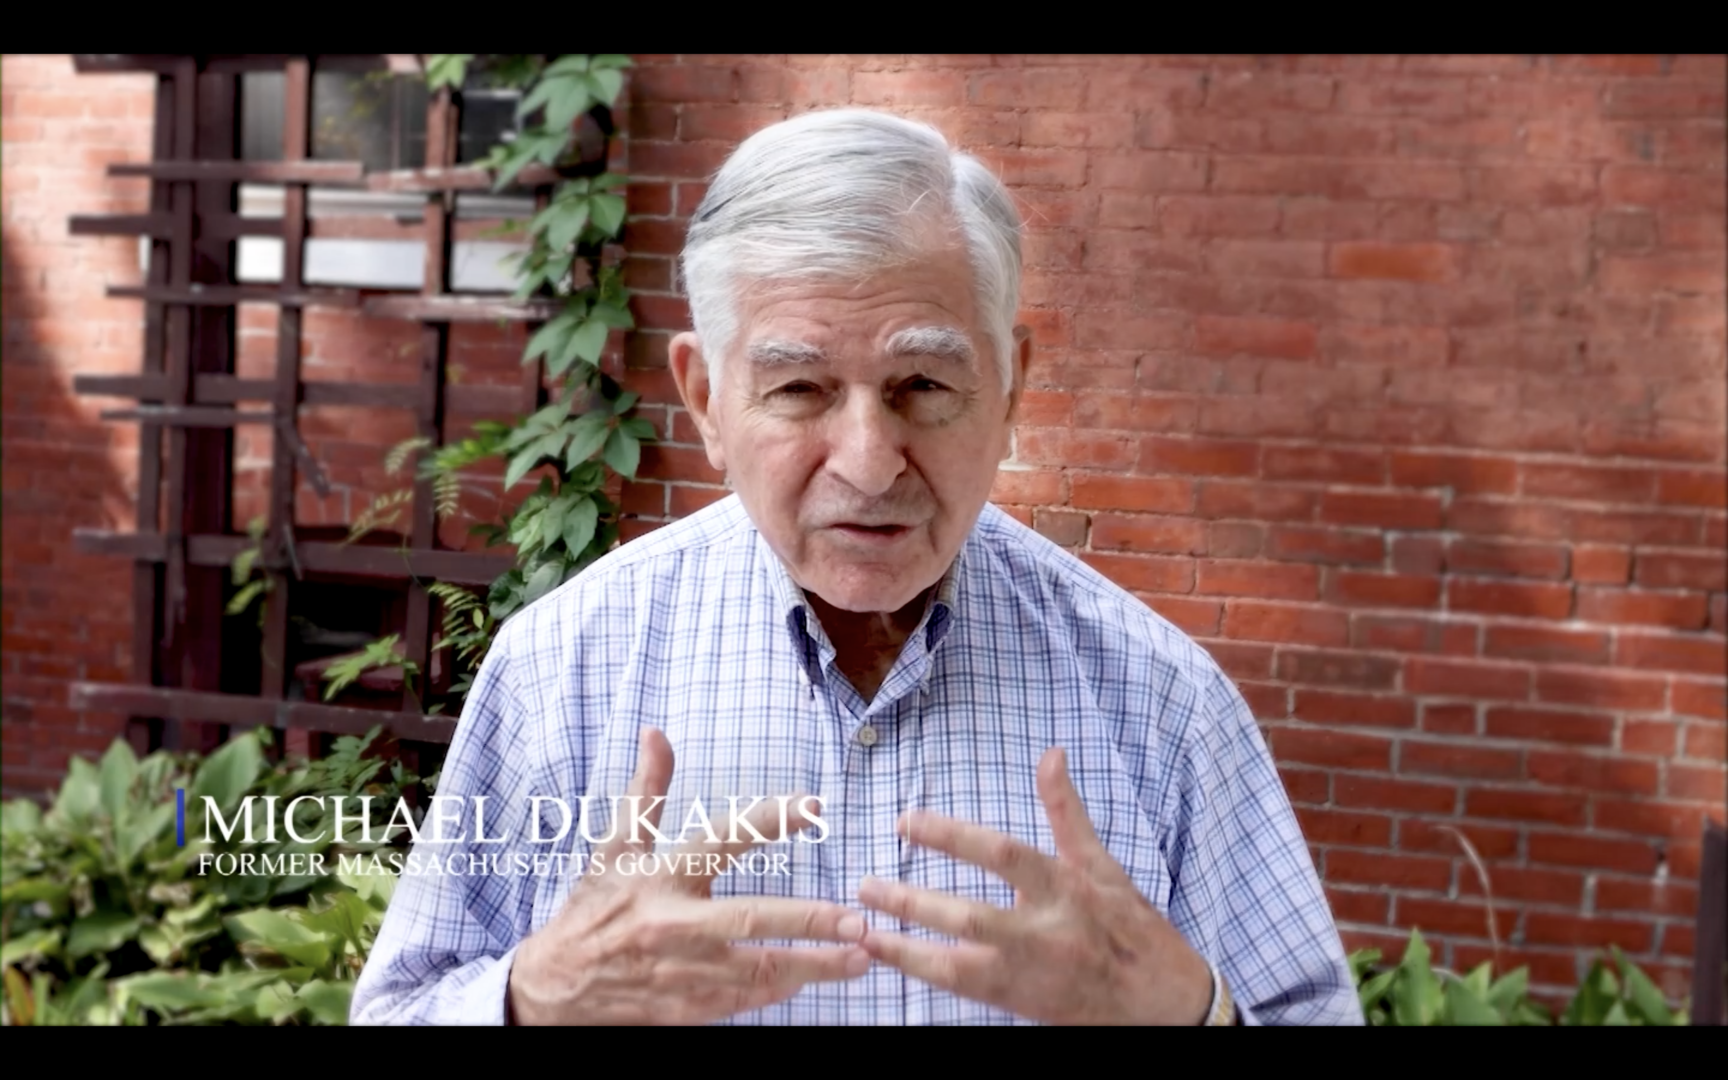 Michael Dukakis in a screenshot from one of the videos, standing in front of a red brick wall.